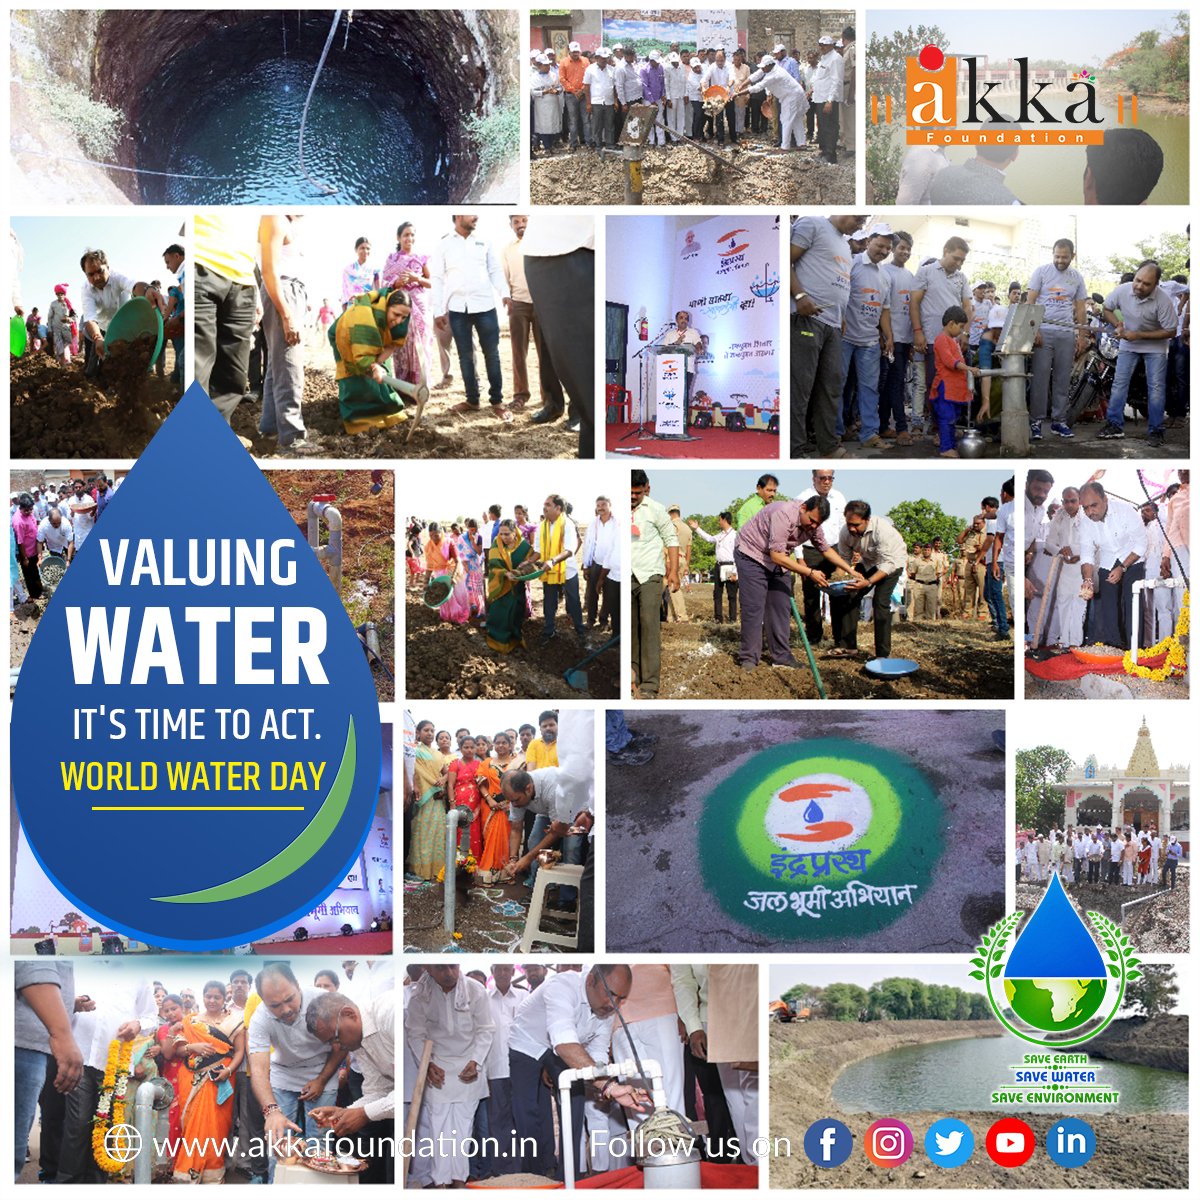 'This World Water Day, let's come together to raise awareness about the importance of water conservation and sustainable water management practices.'

#worldwaterday #waterday #akka #akkafoundation #projectanandi #drushtiabhiyan